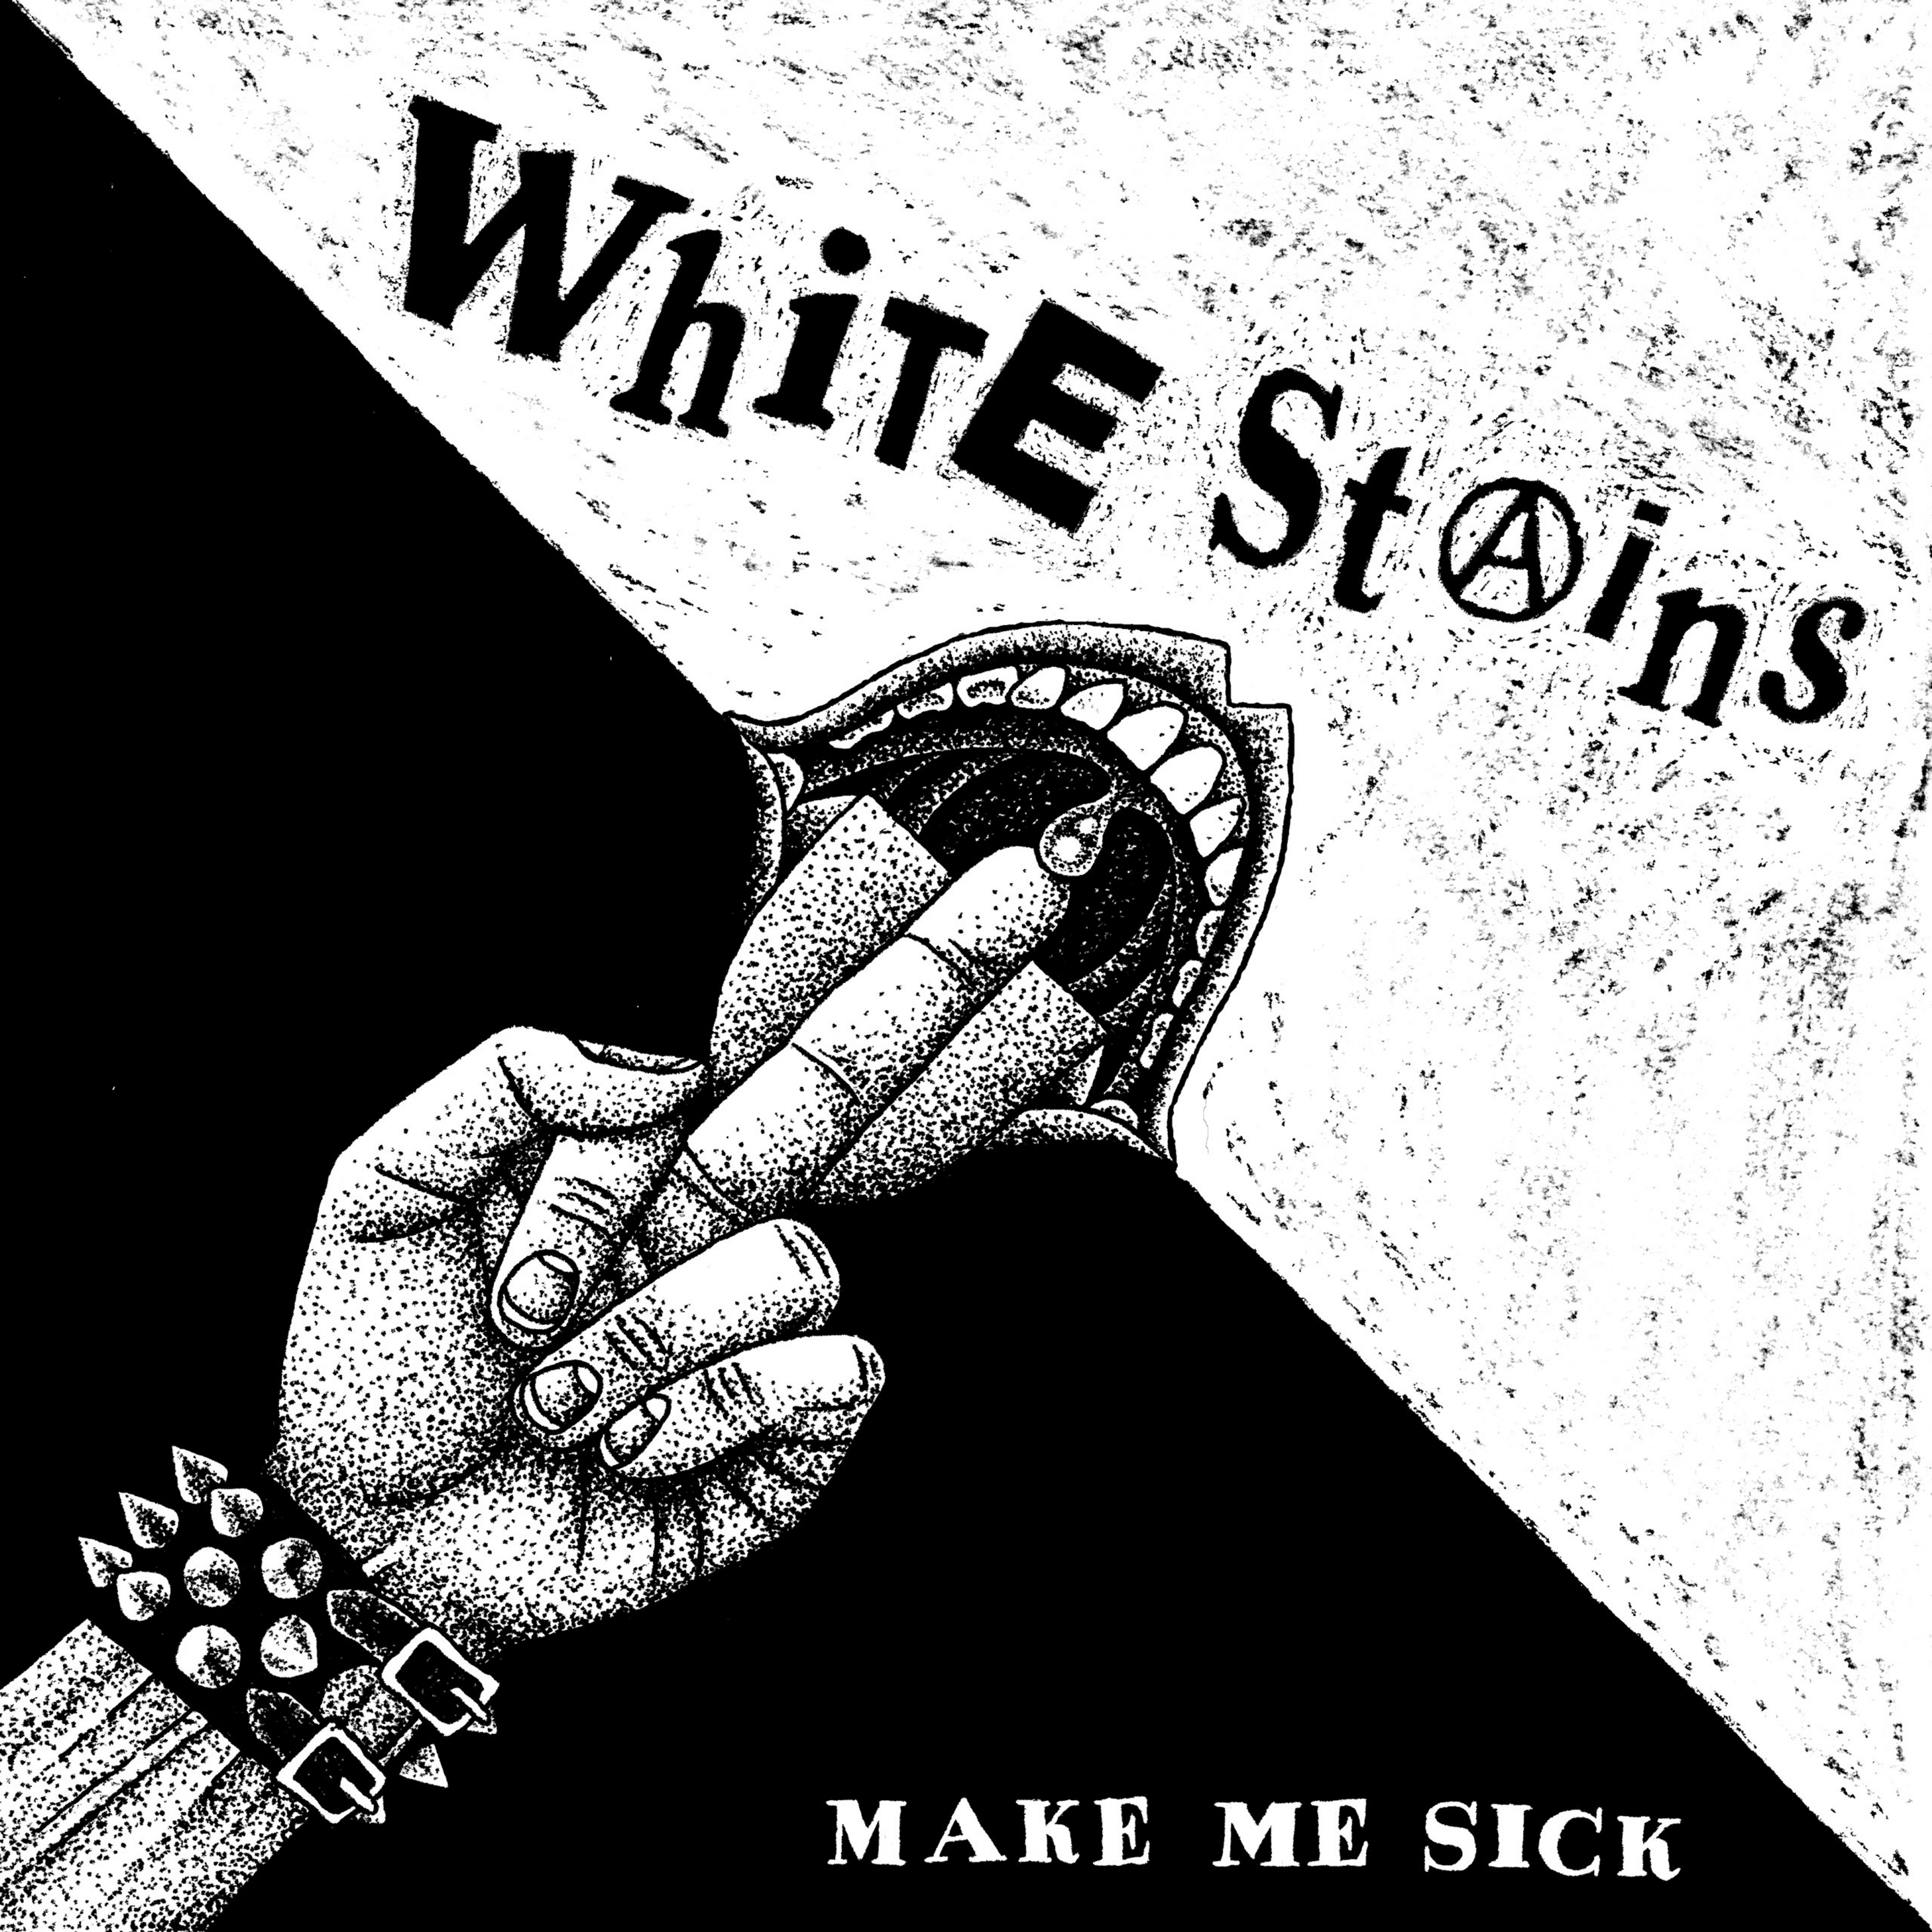 A White Stains record.